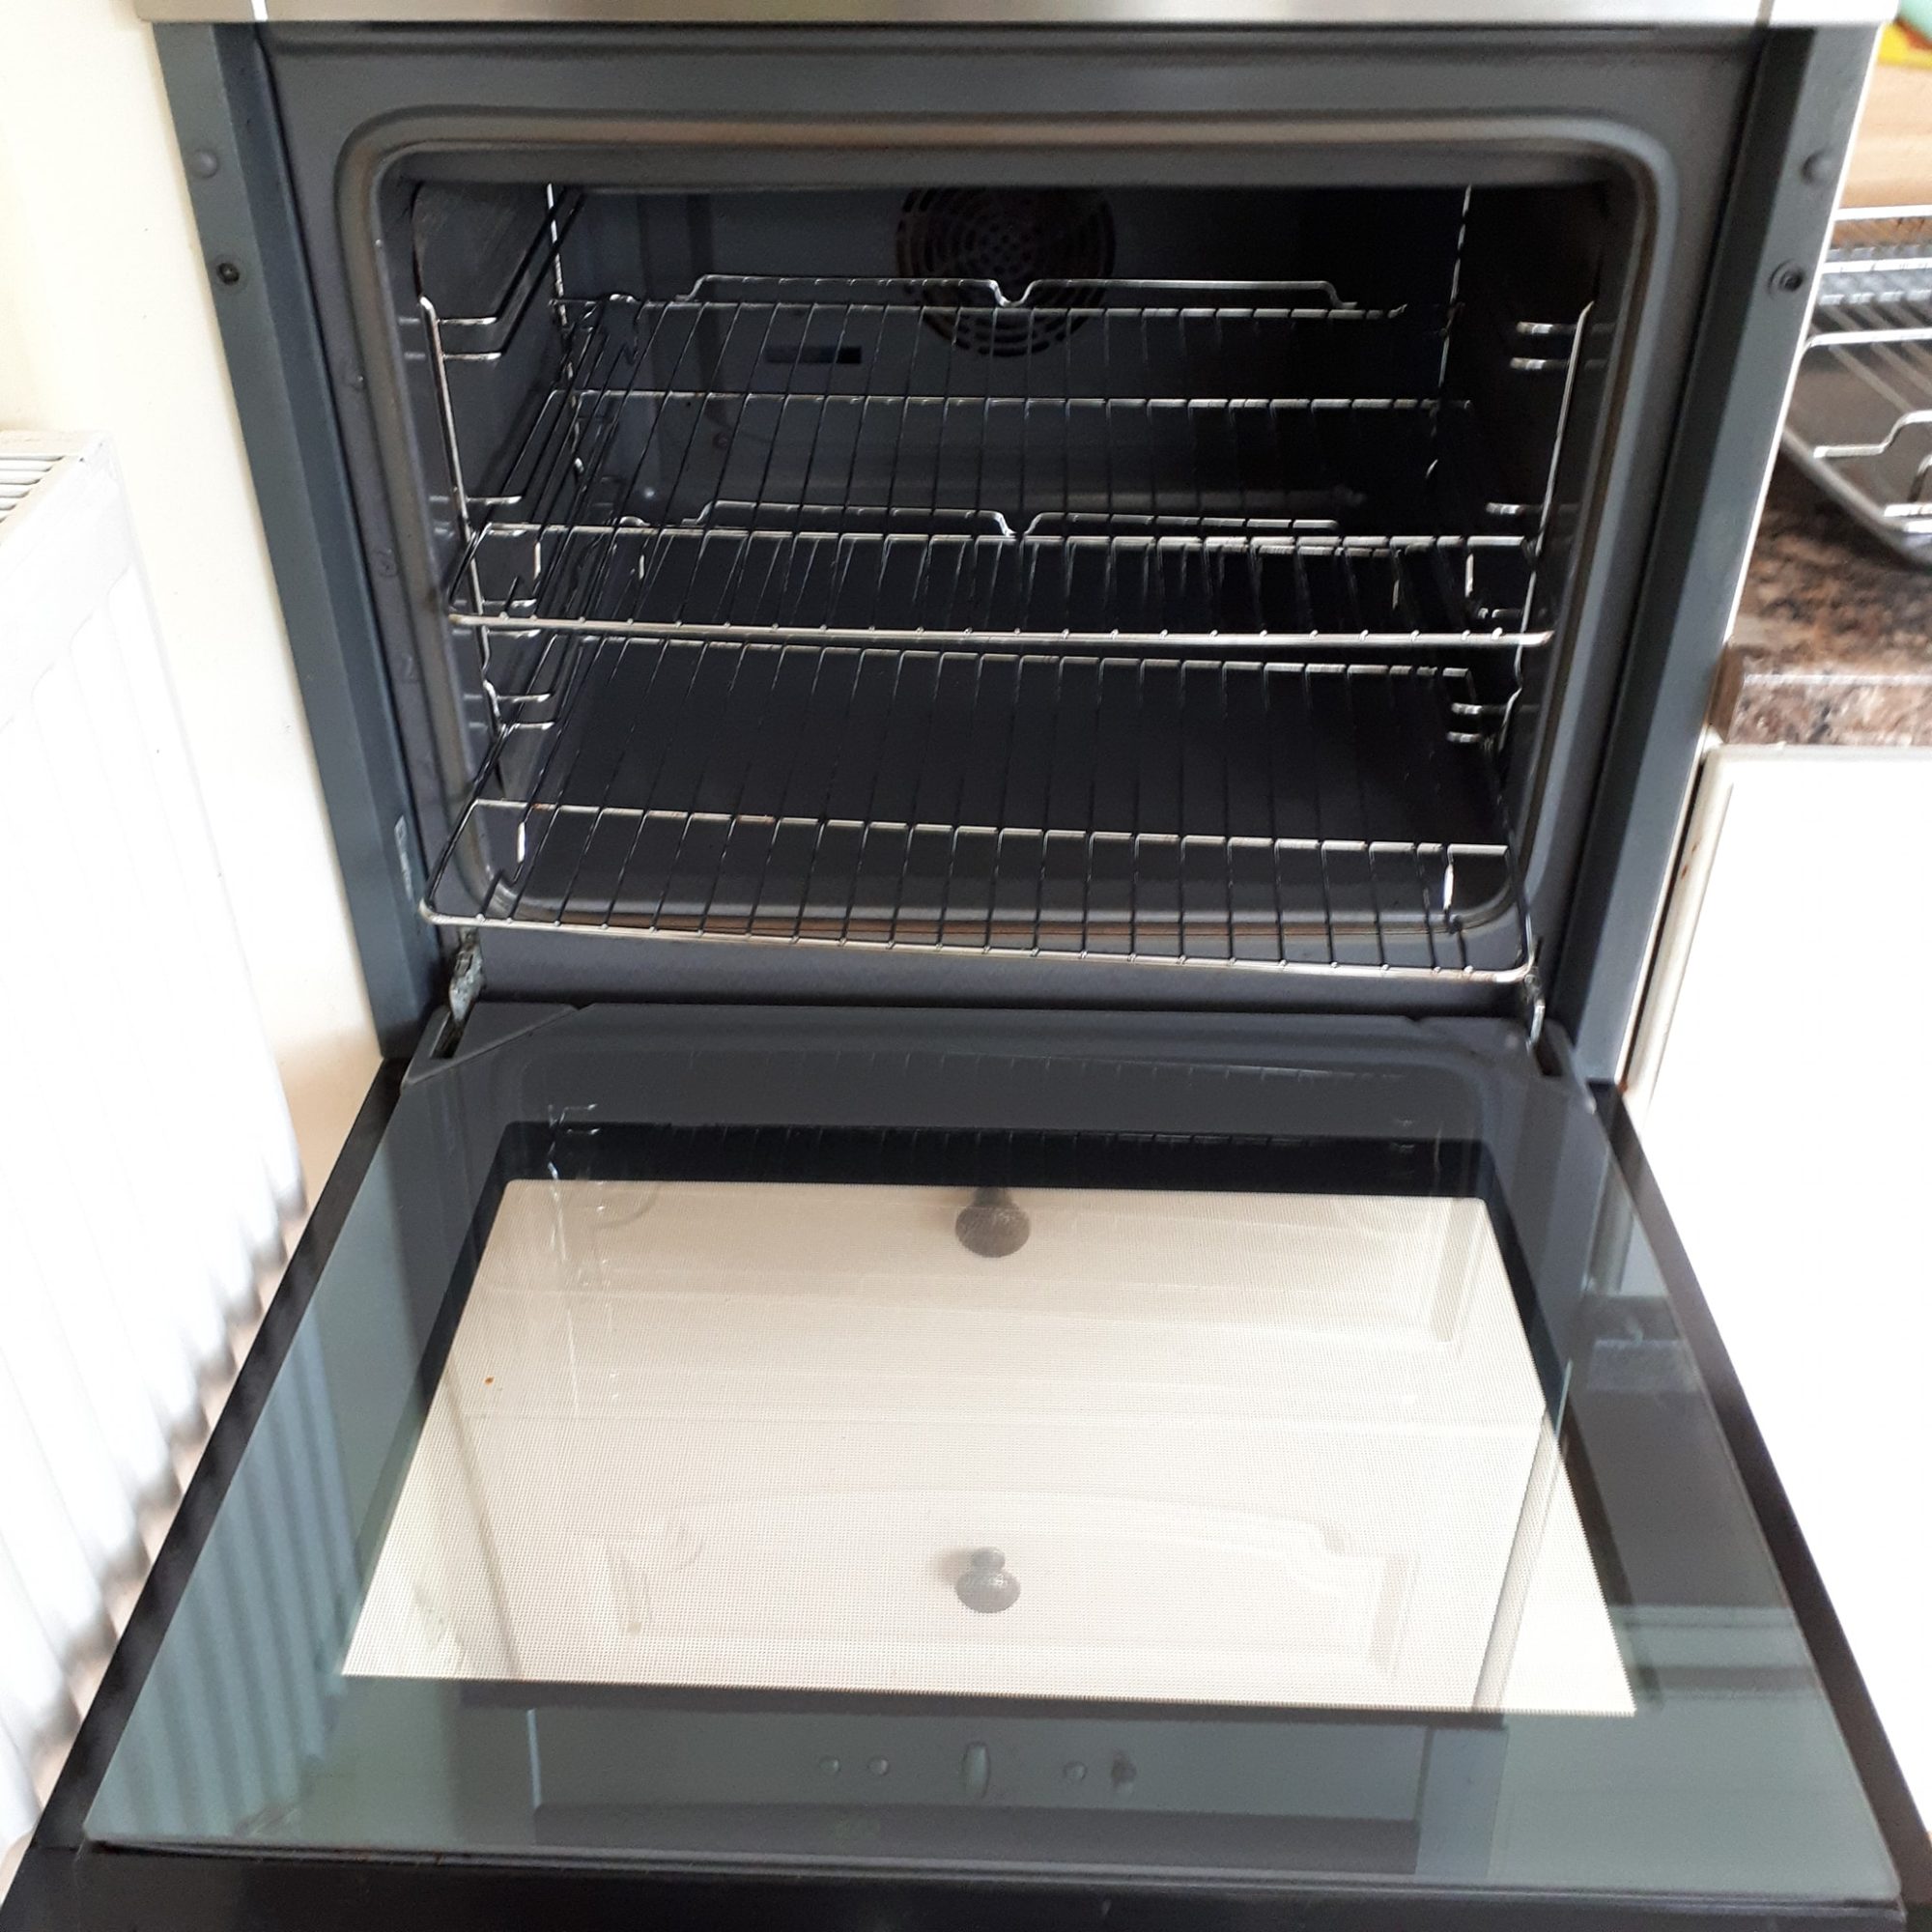 Cleaned oven